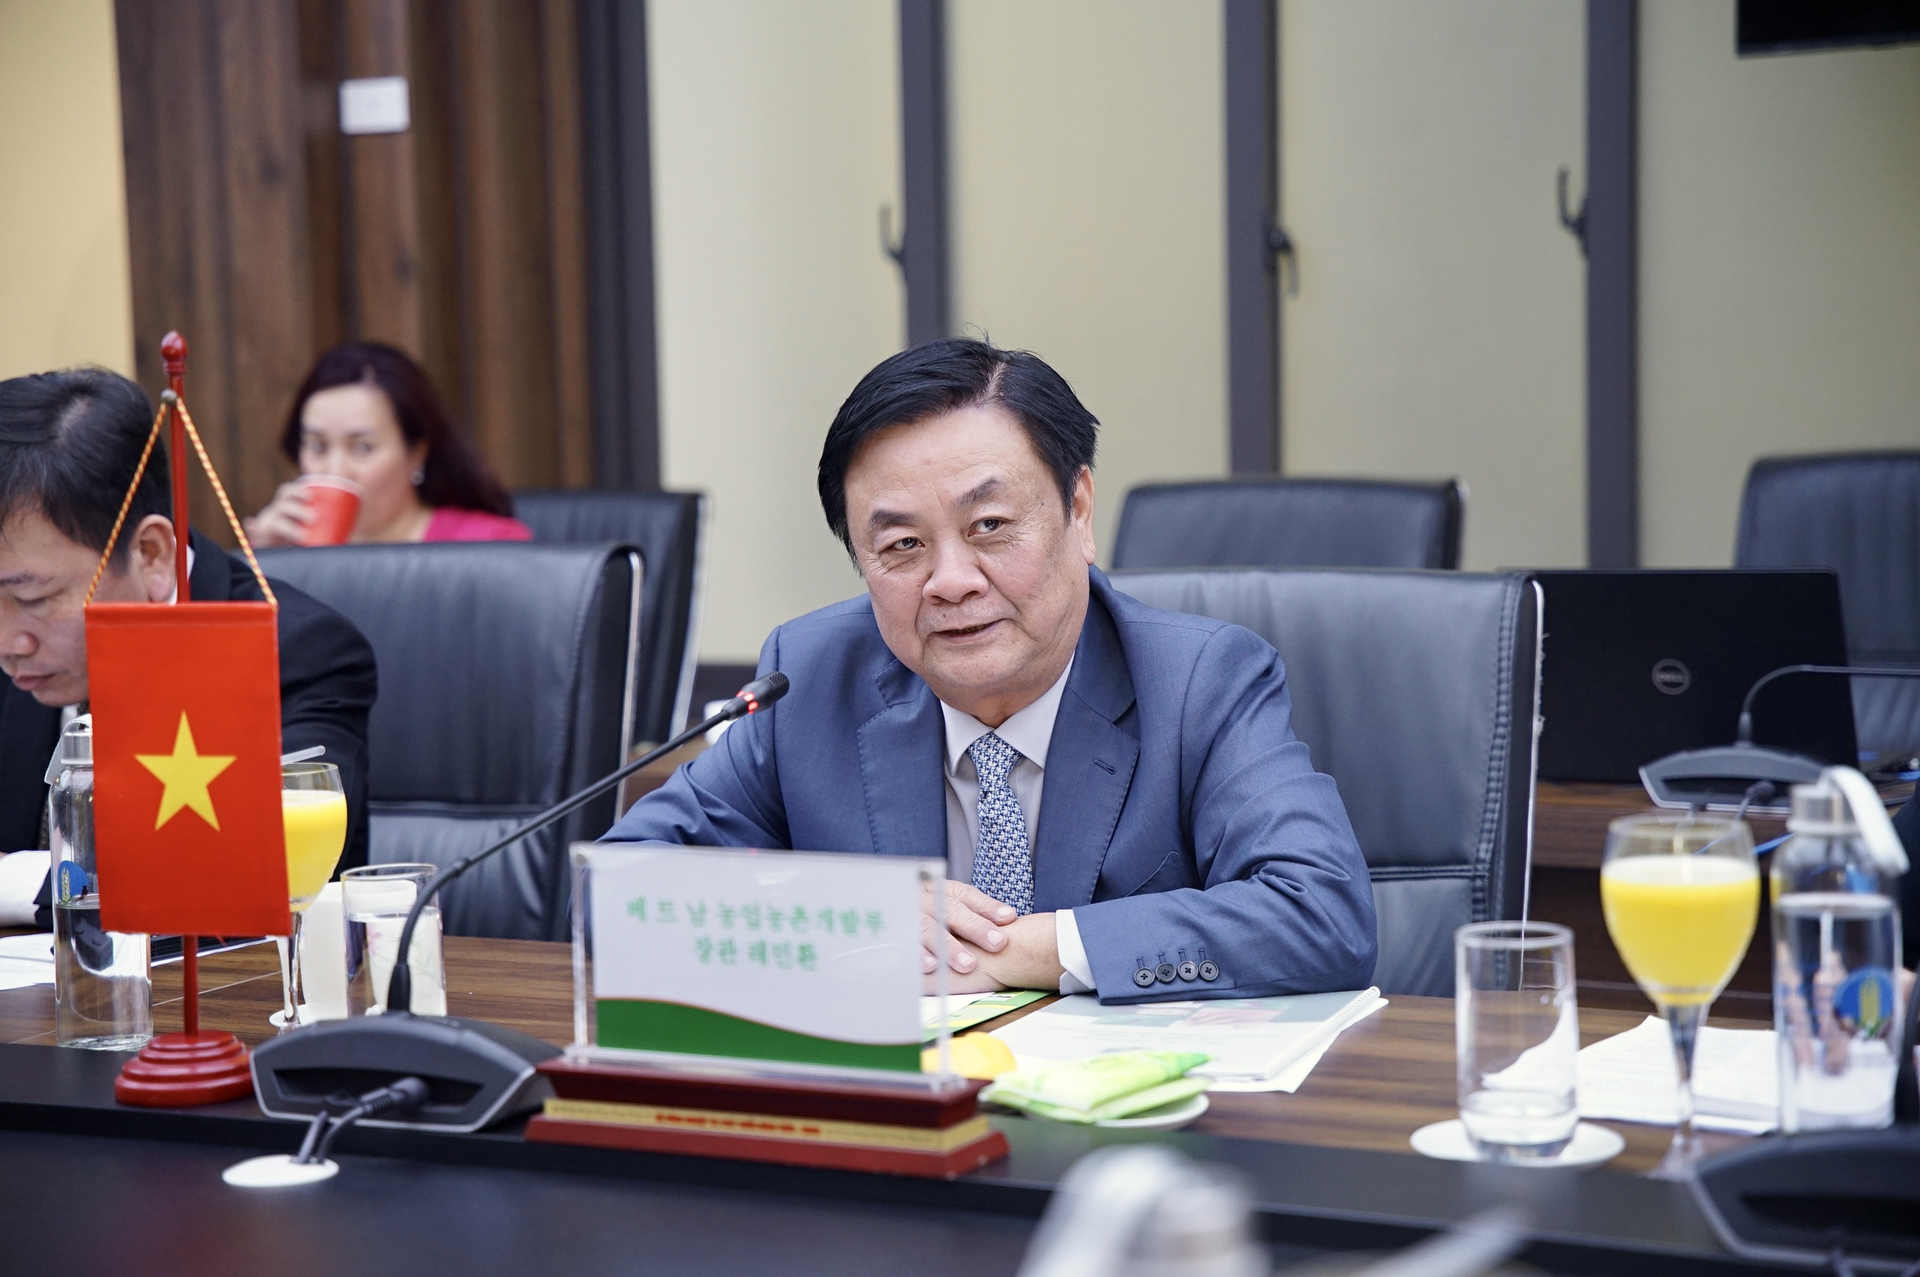 The minister said he was looking forward to the cooperation between RoK and Vietnam in the field of forestry through cooperation projects and programs. Photo: Linh Linh.